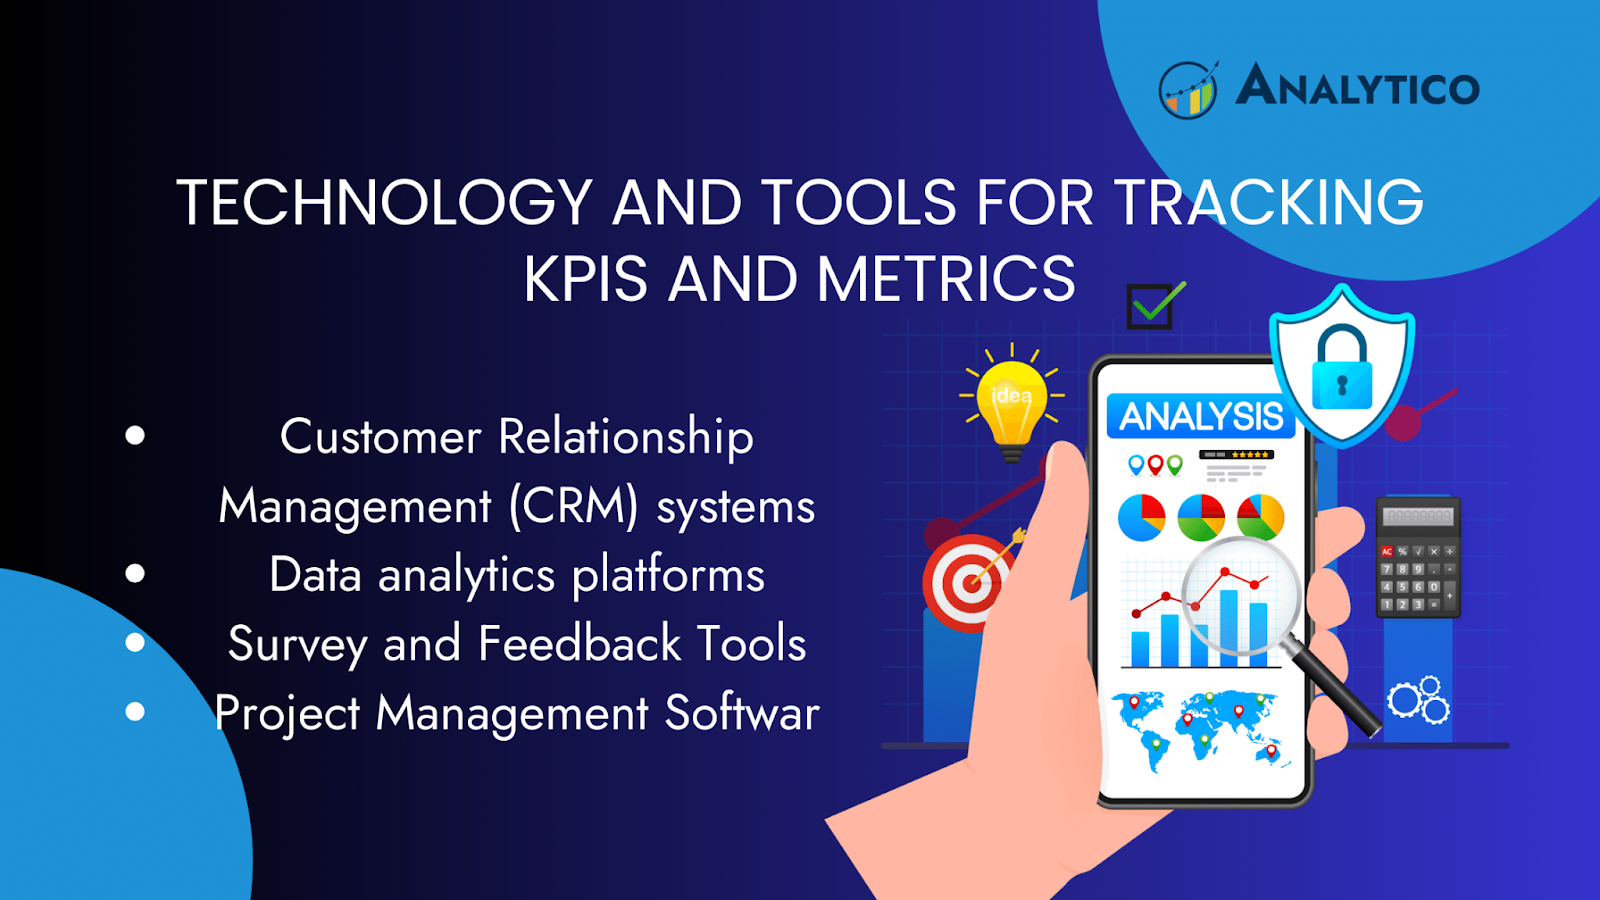 Technology and Tools for Tracking KPIs and Metrics